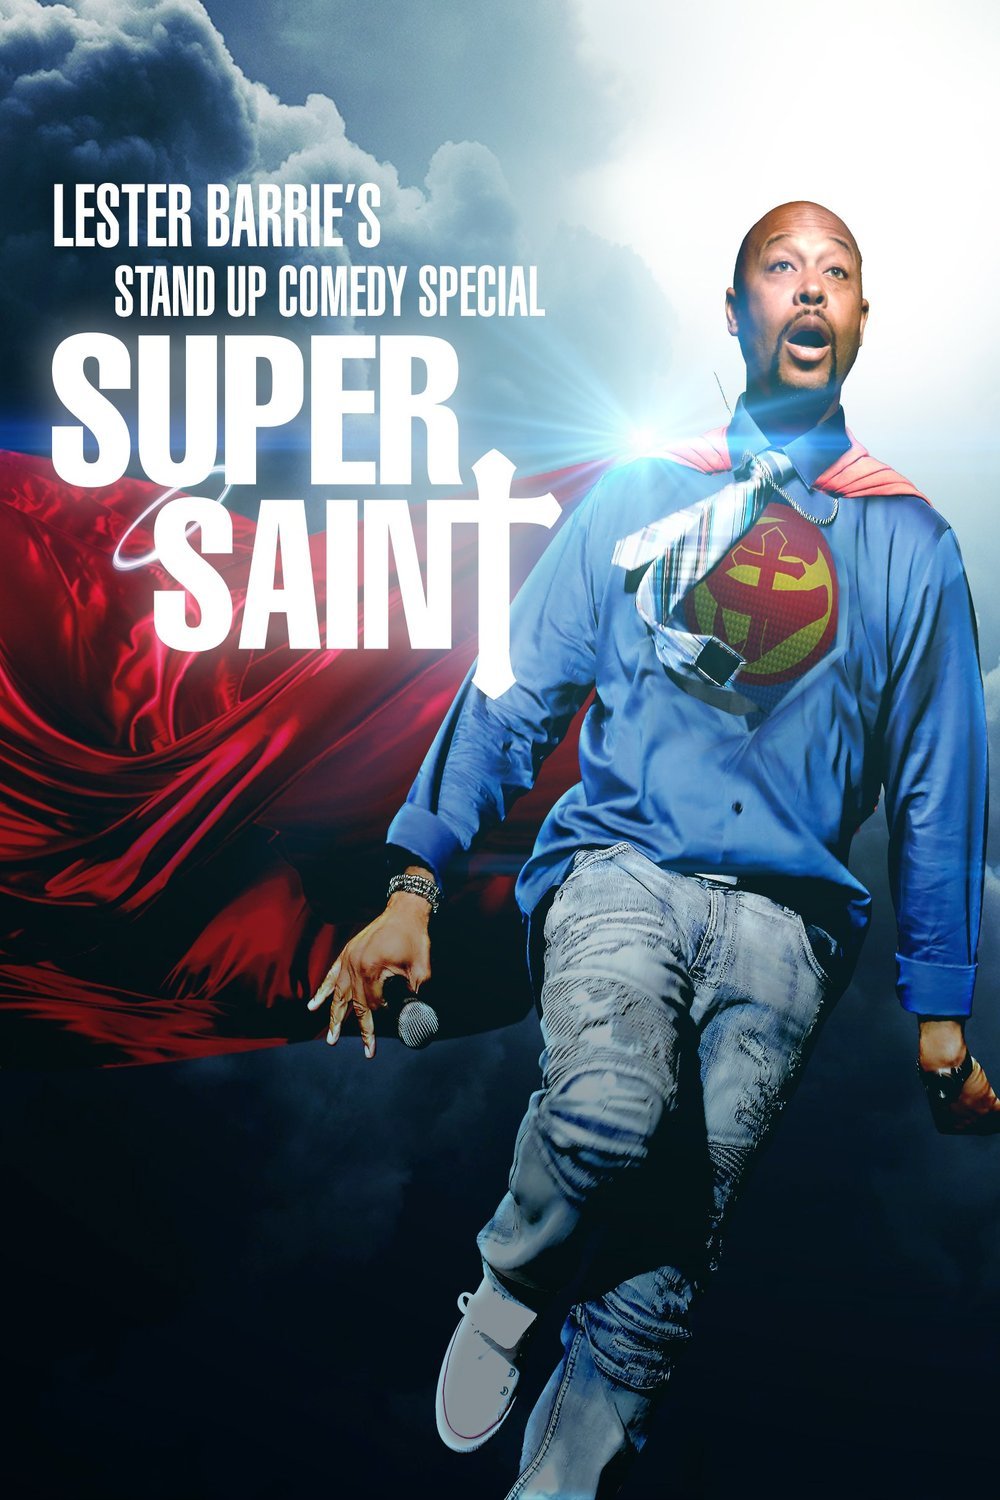 Poster of the movie Lester Barrie's Stand Up Comedy Special: Super Saint